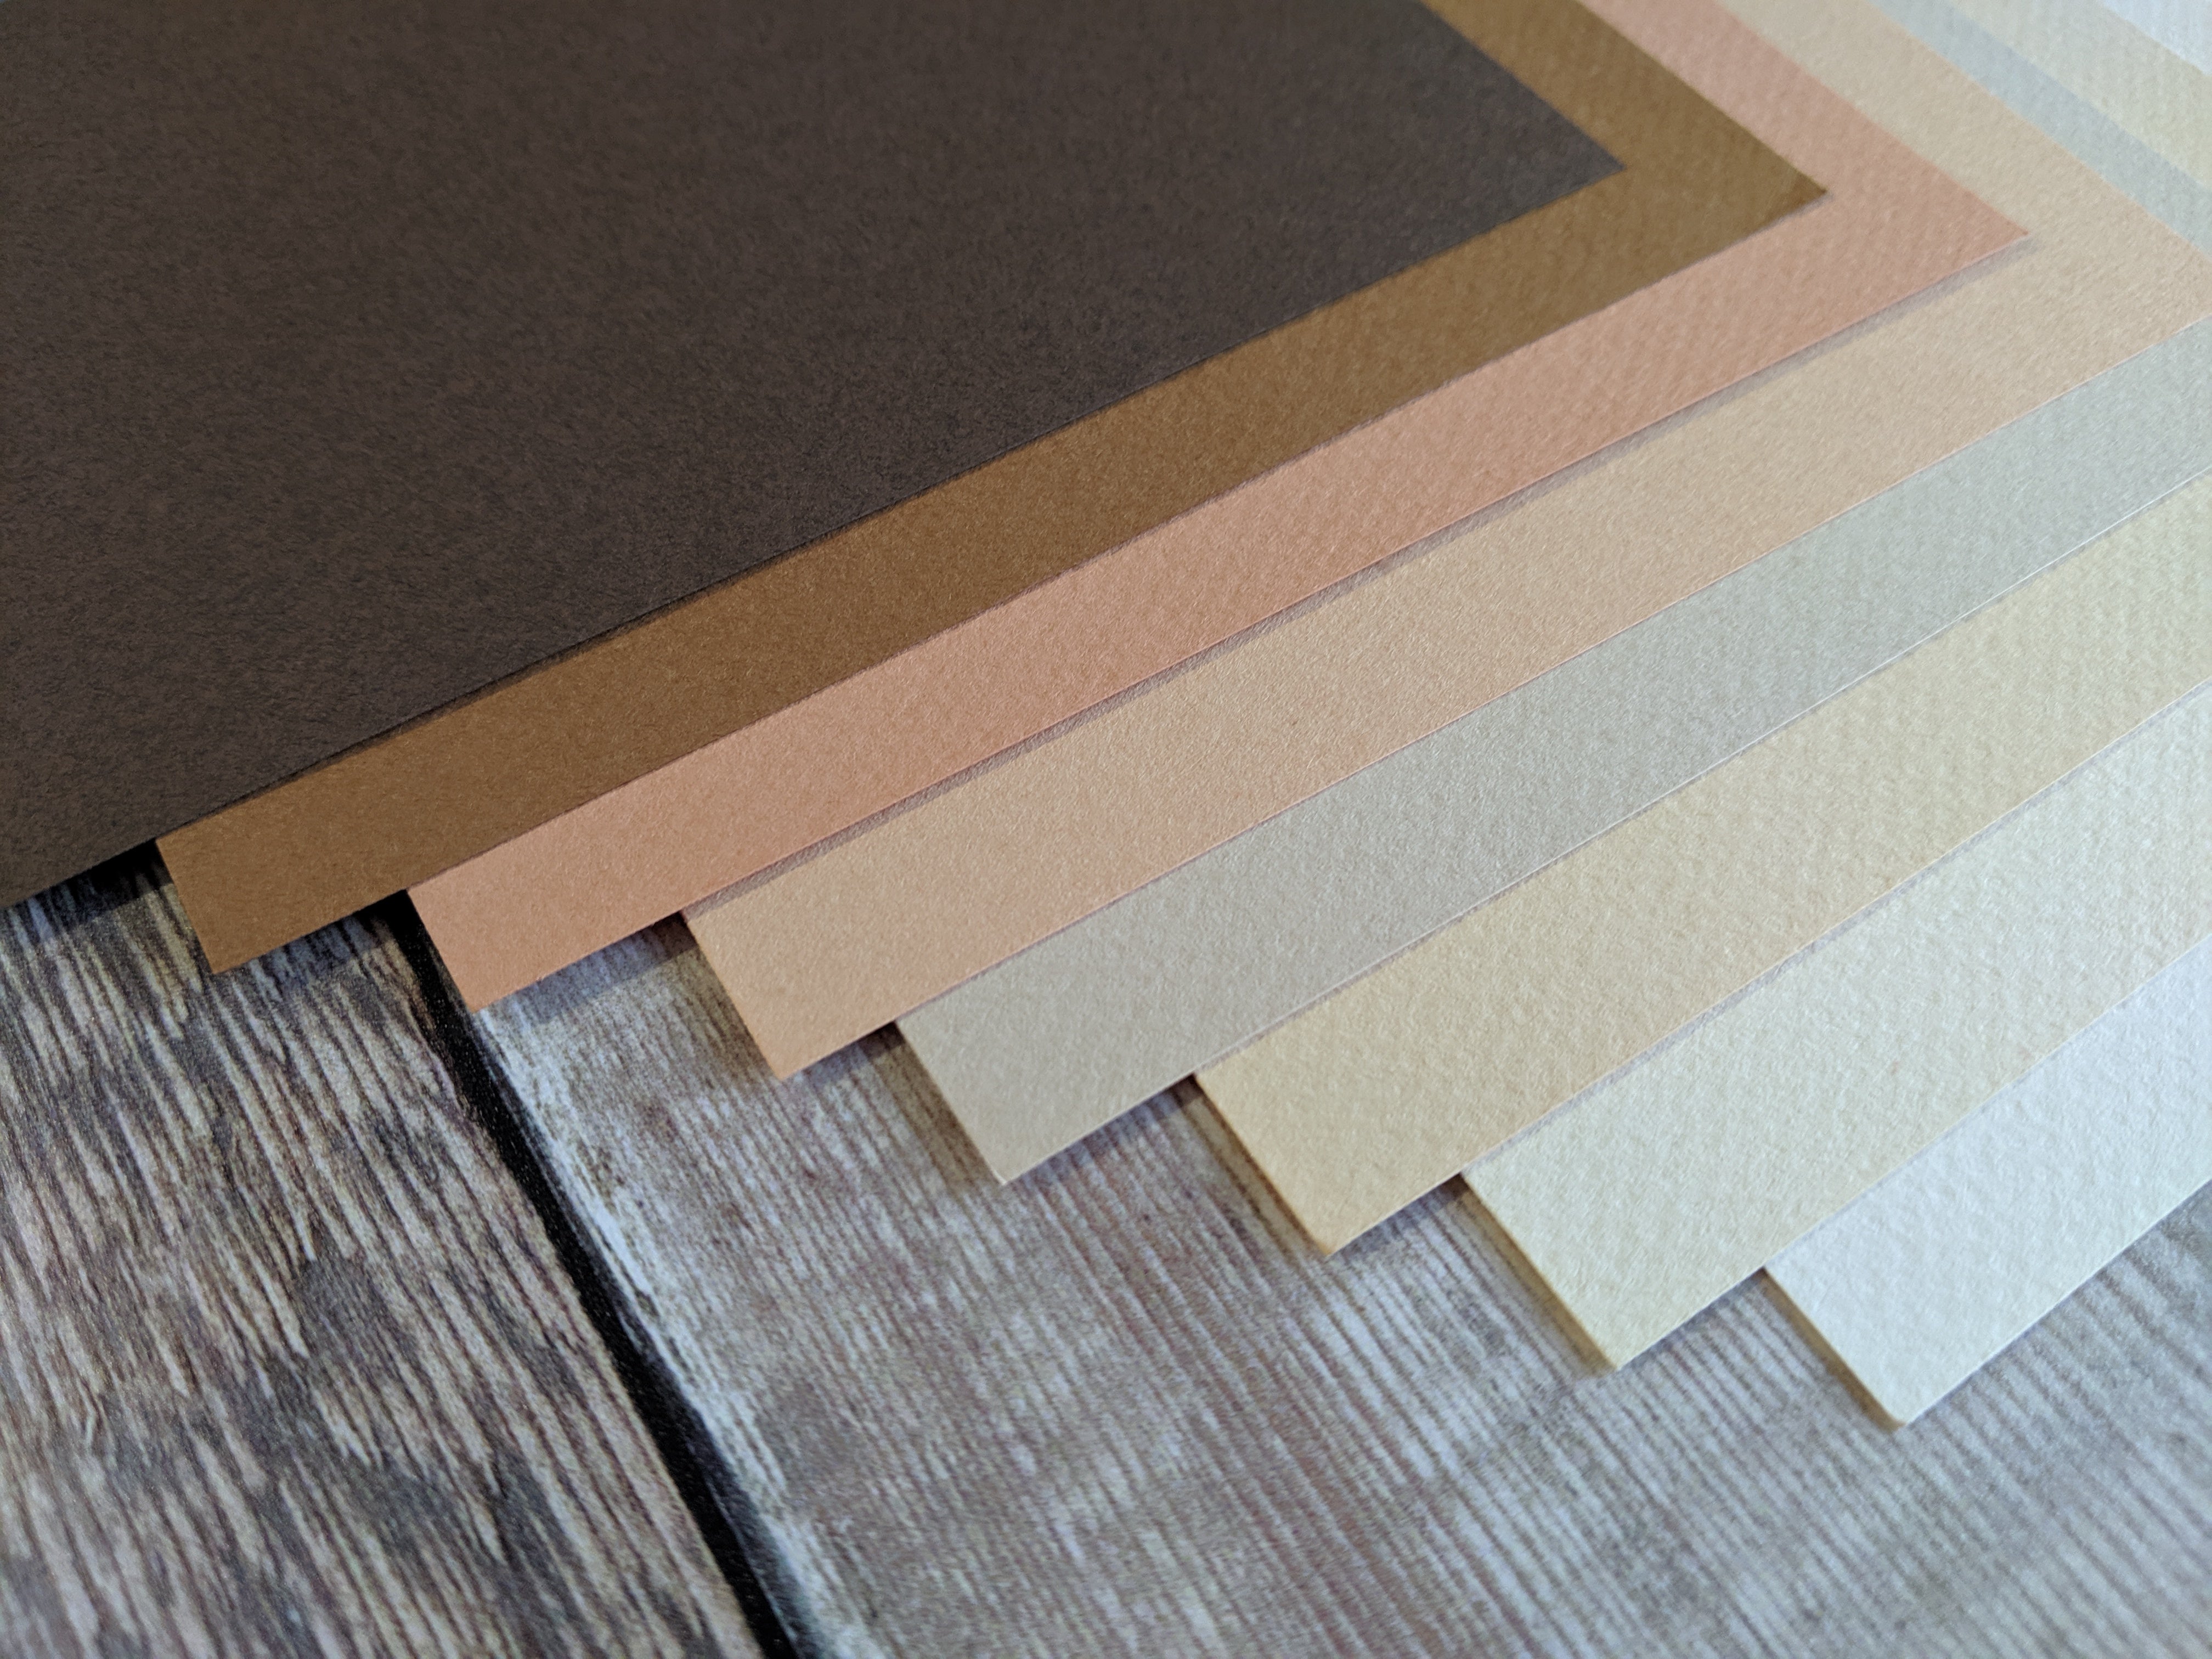 8 Layered pack of Brown Warm shades Hammered 160 gsm paper A4